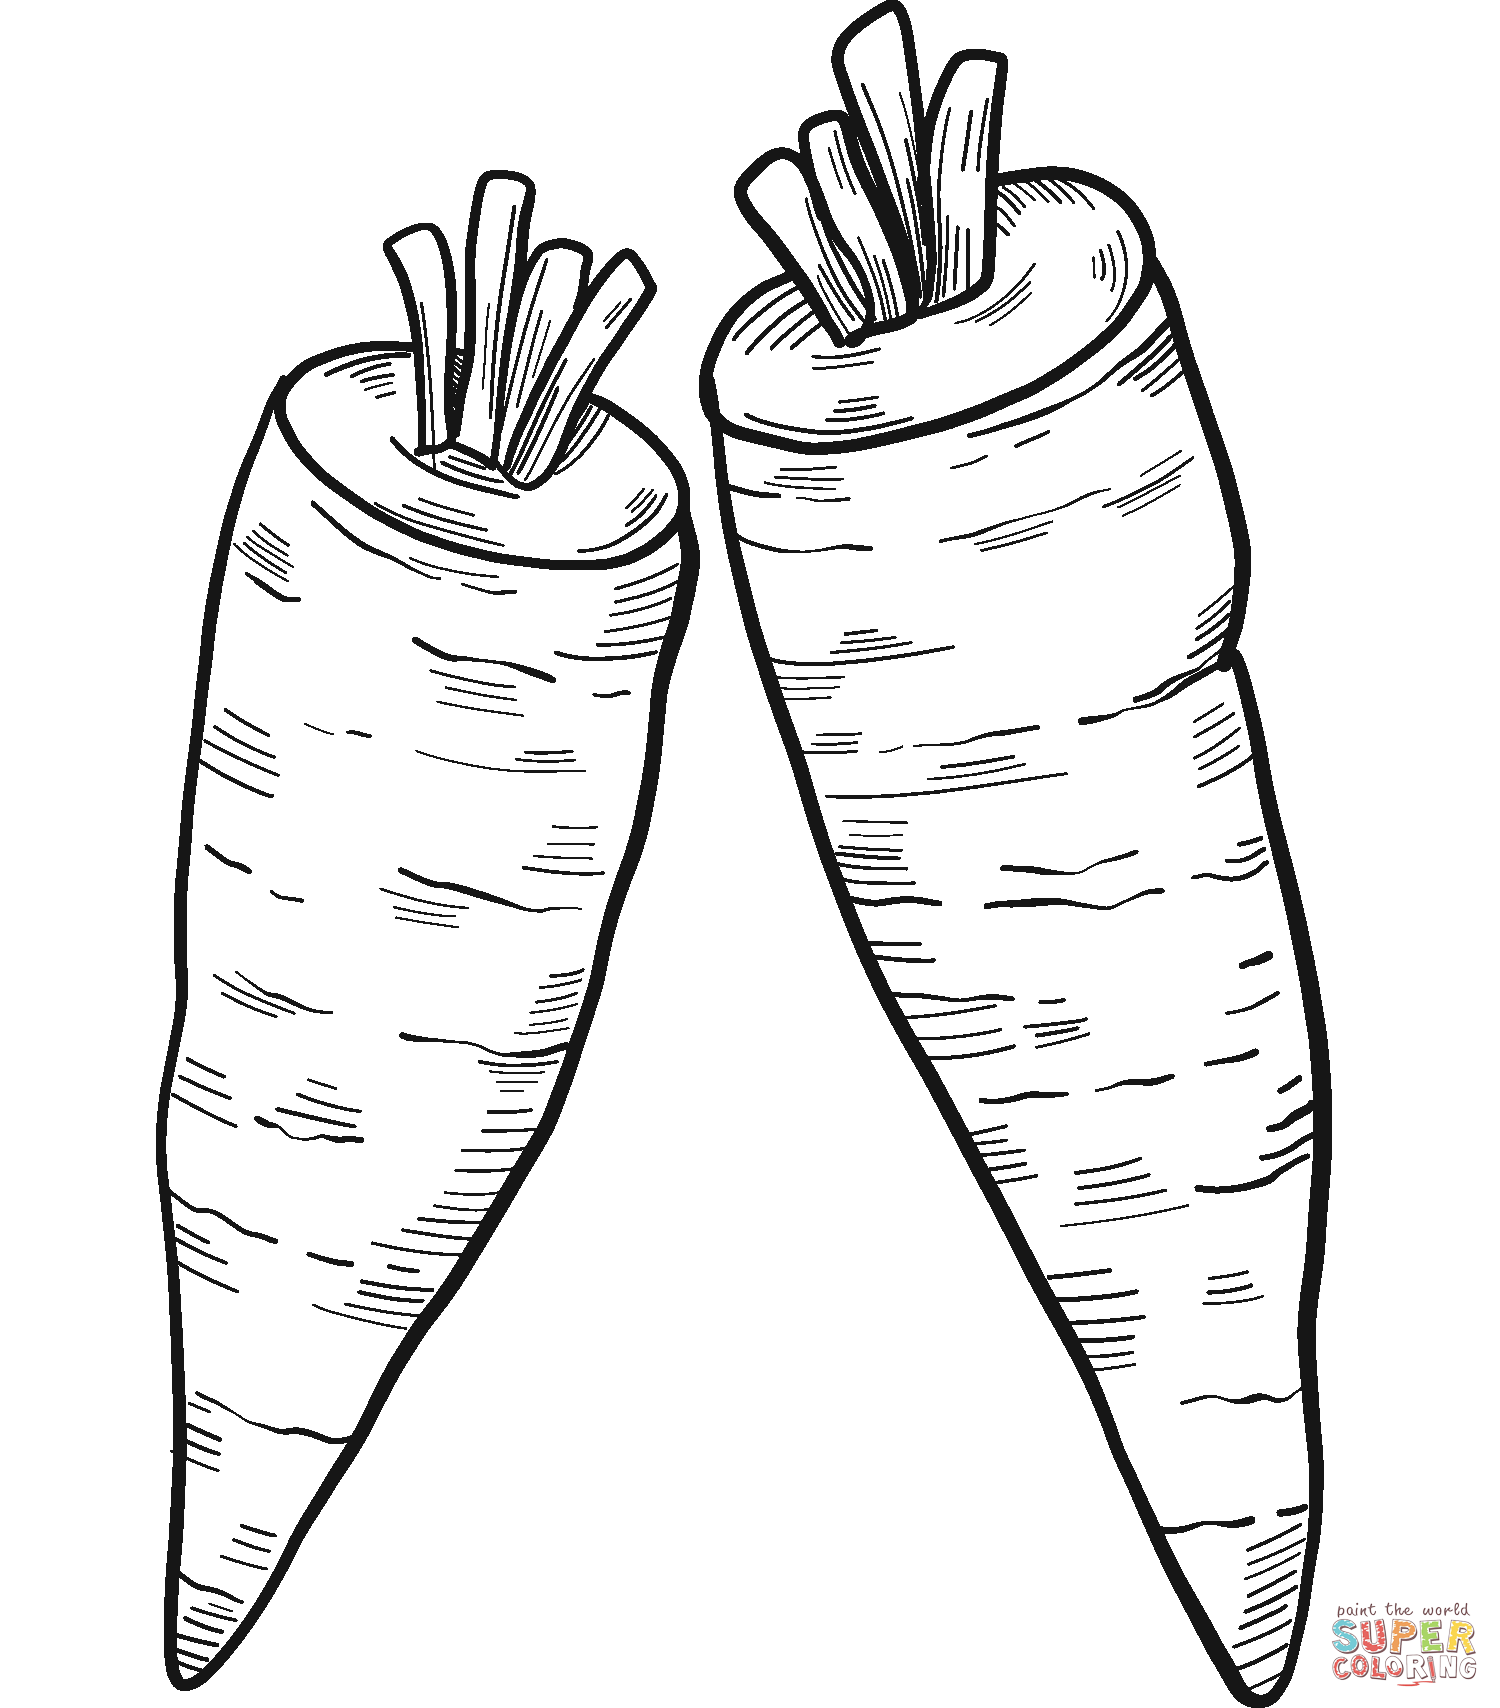 Two carrots coloring page free printable coloring pages